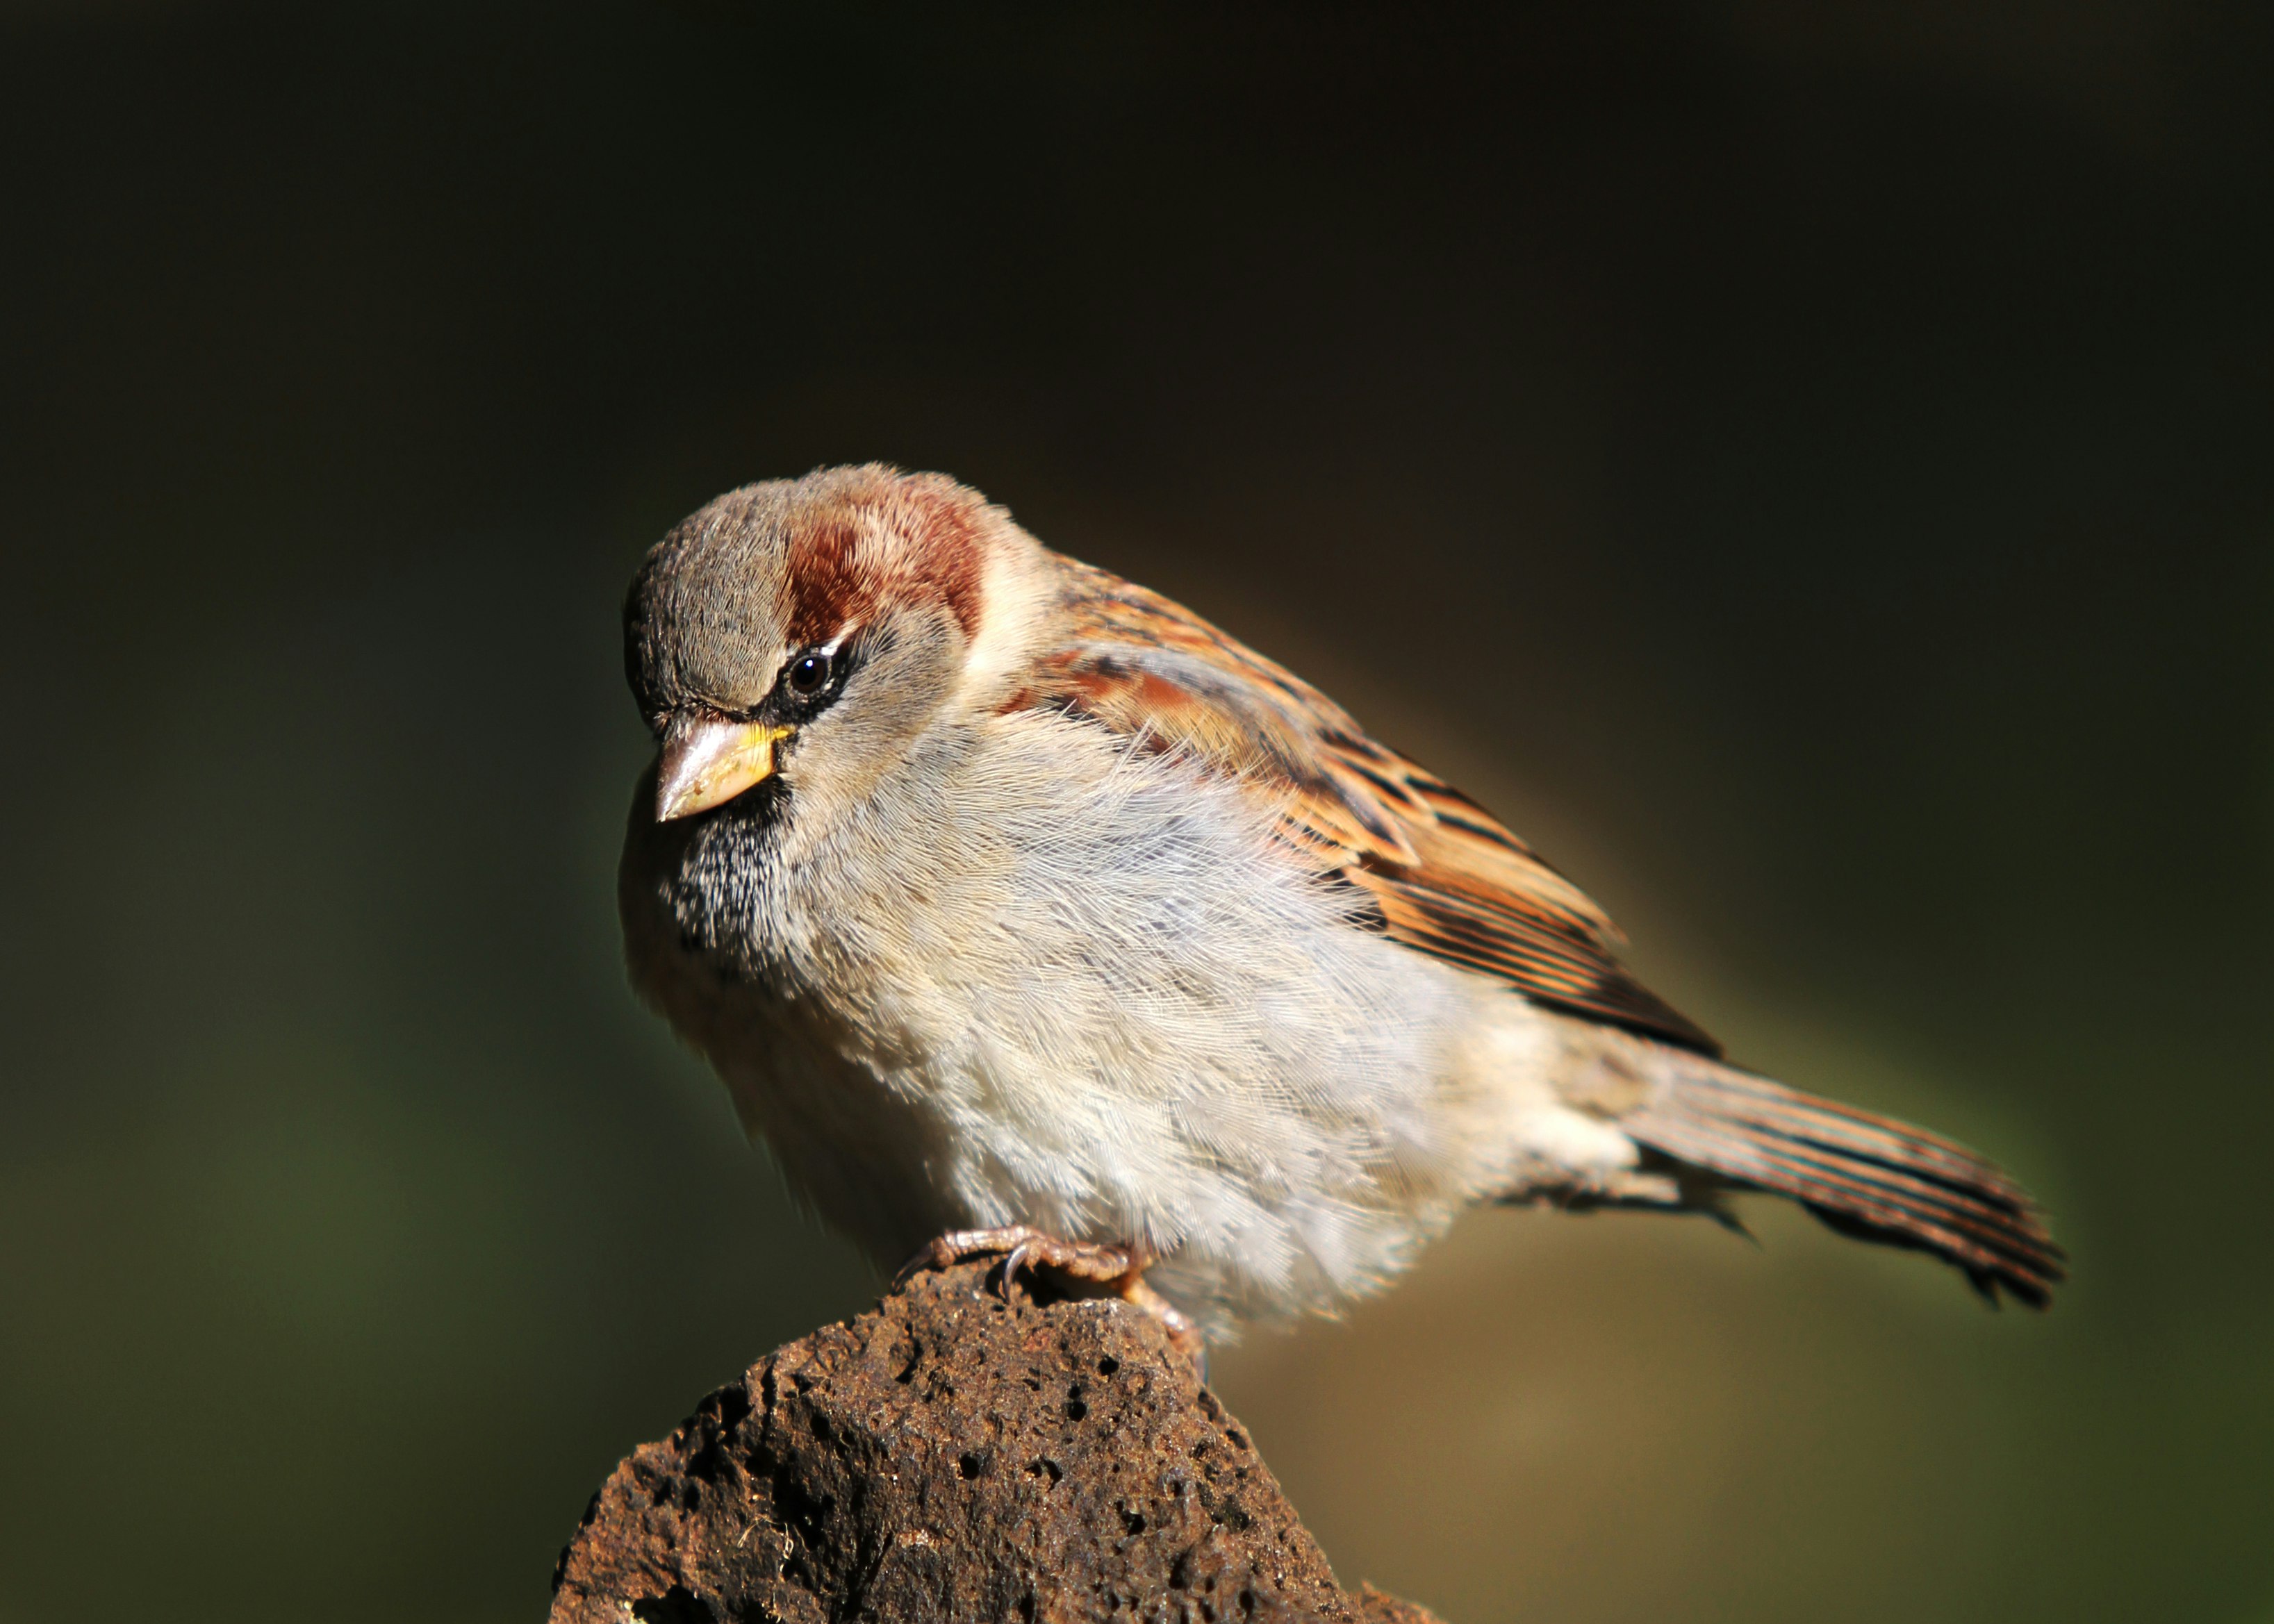 brown and white bird perched on rock in close-up photography